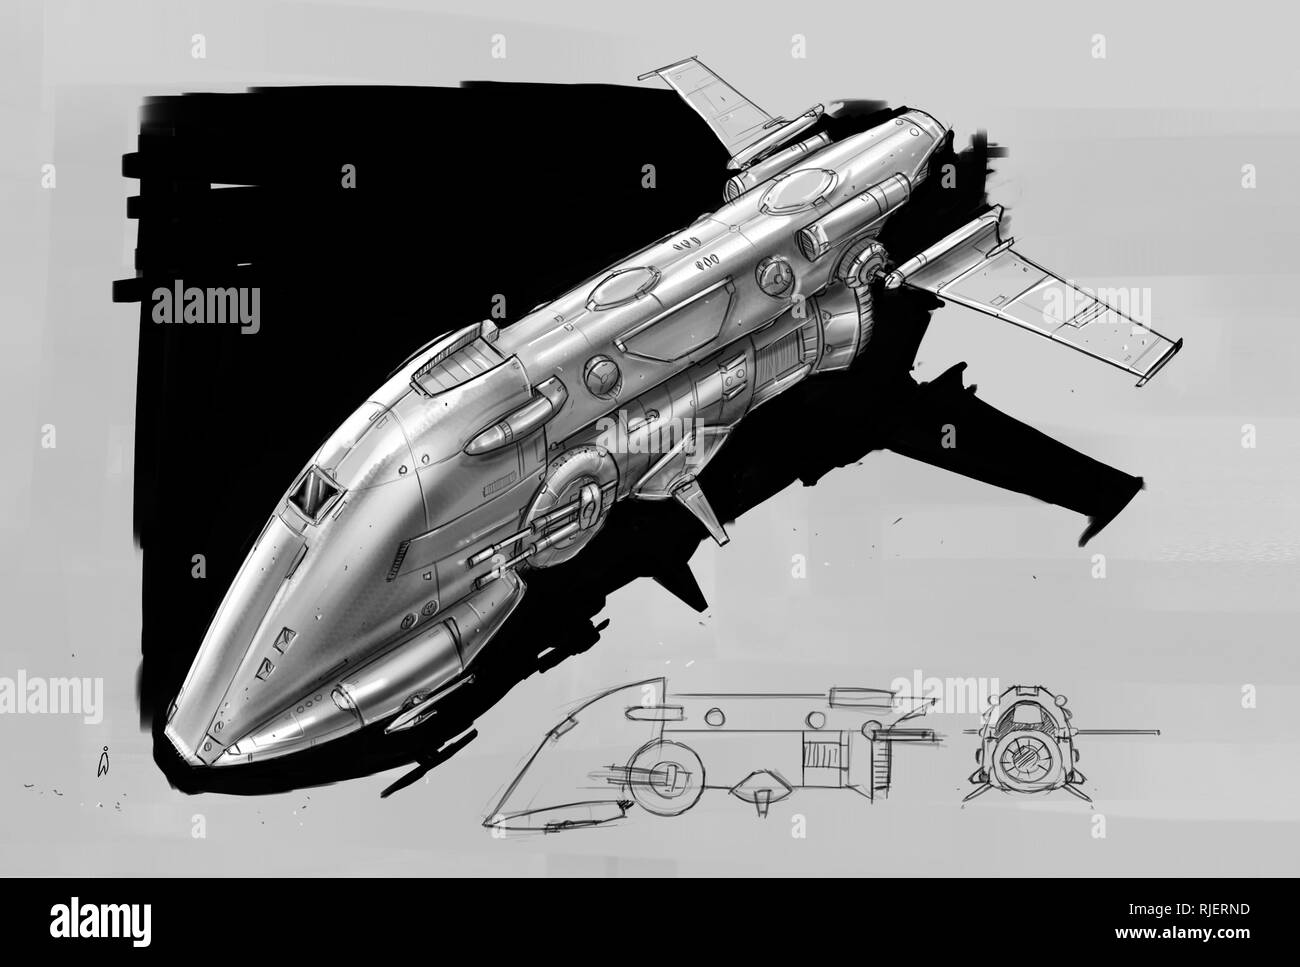 Digital Concept Art Drawing of Space Ship or Spaceship Stock Photo